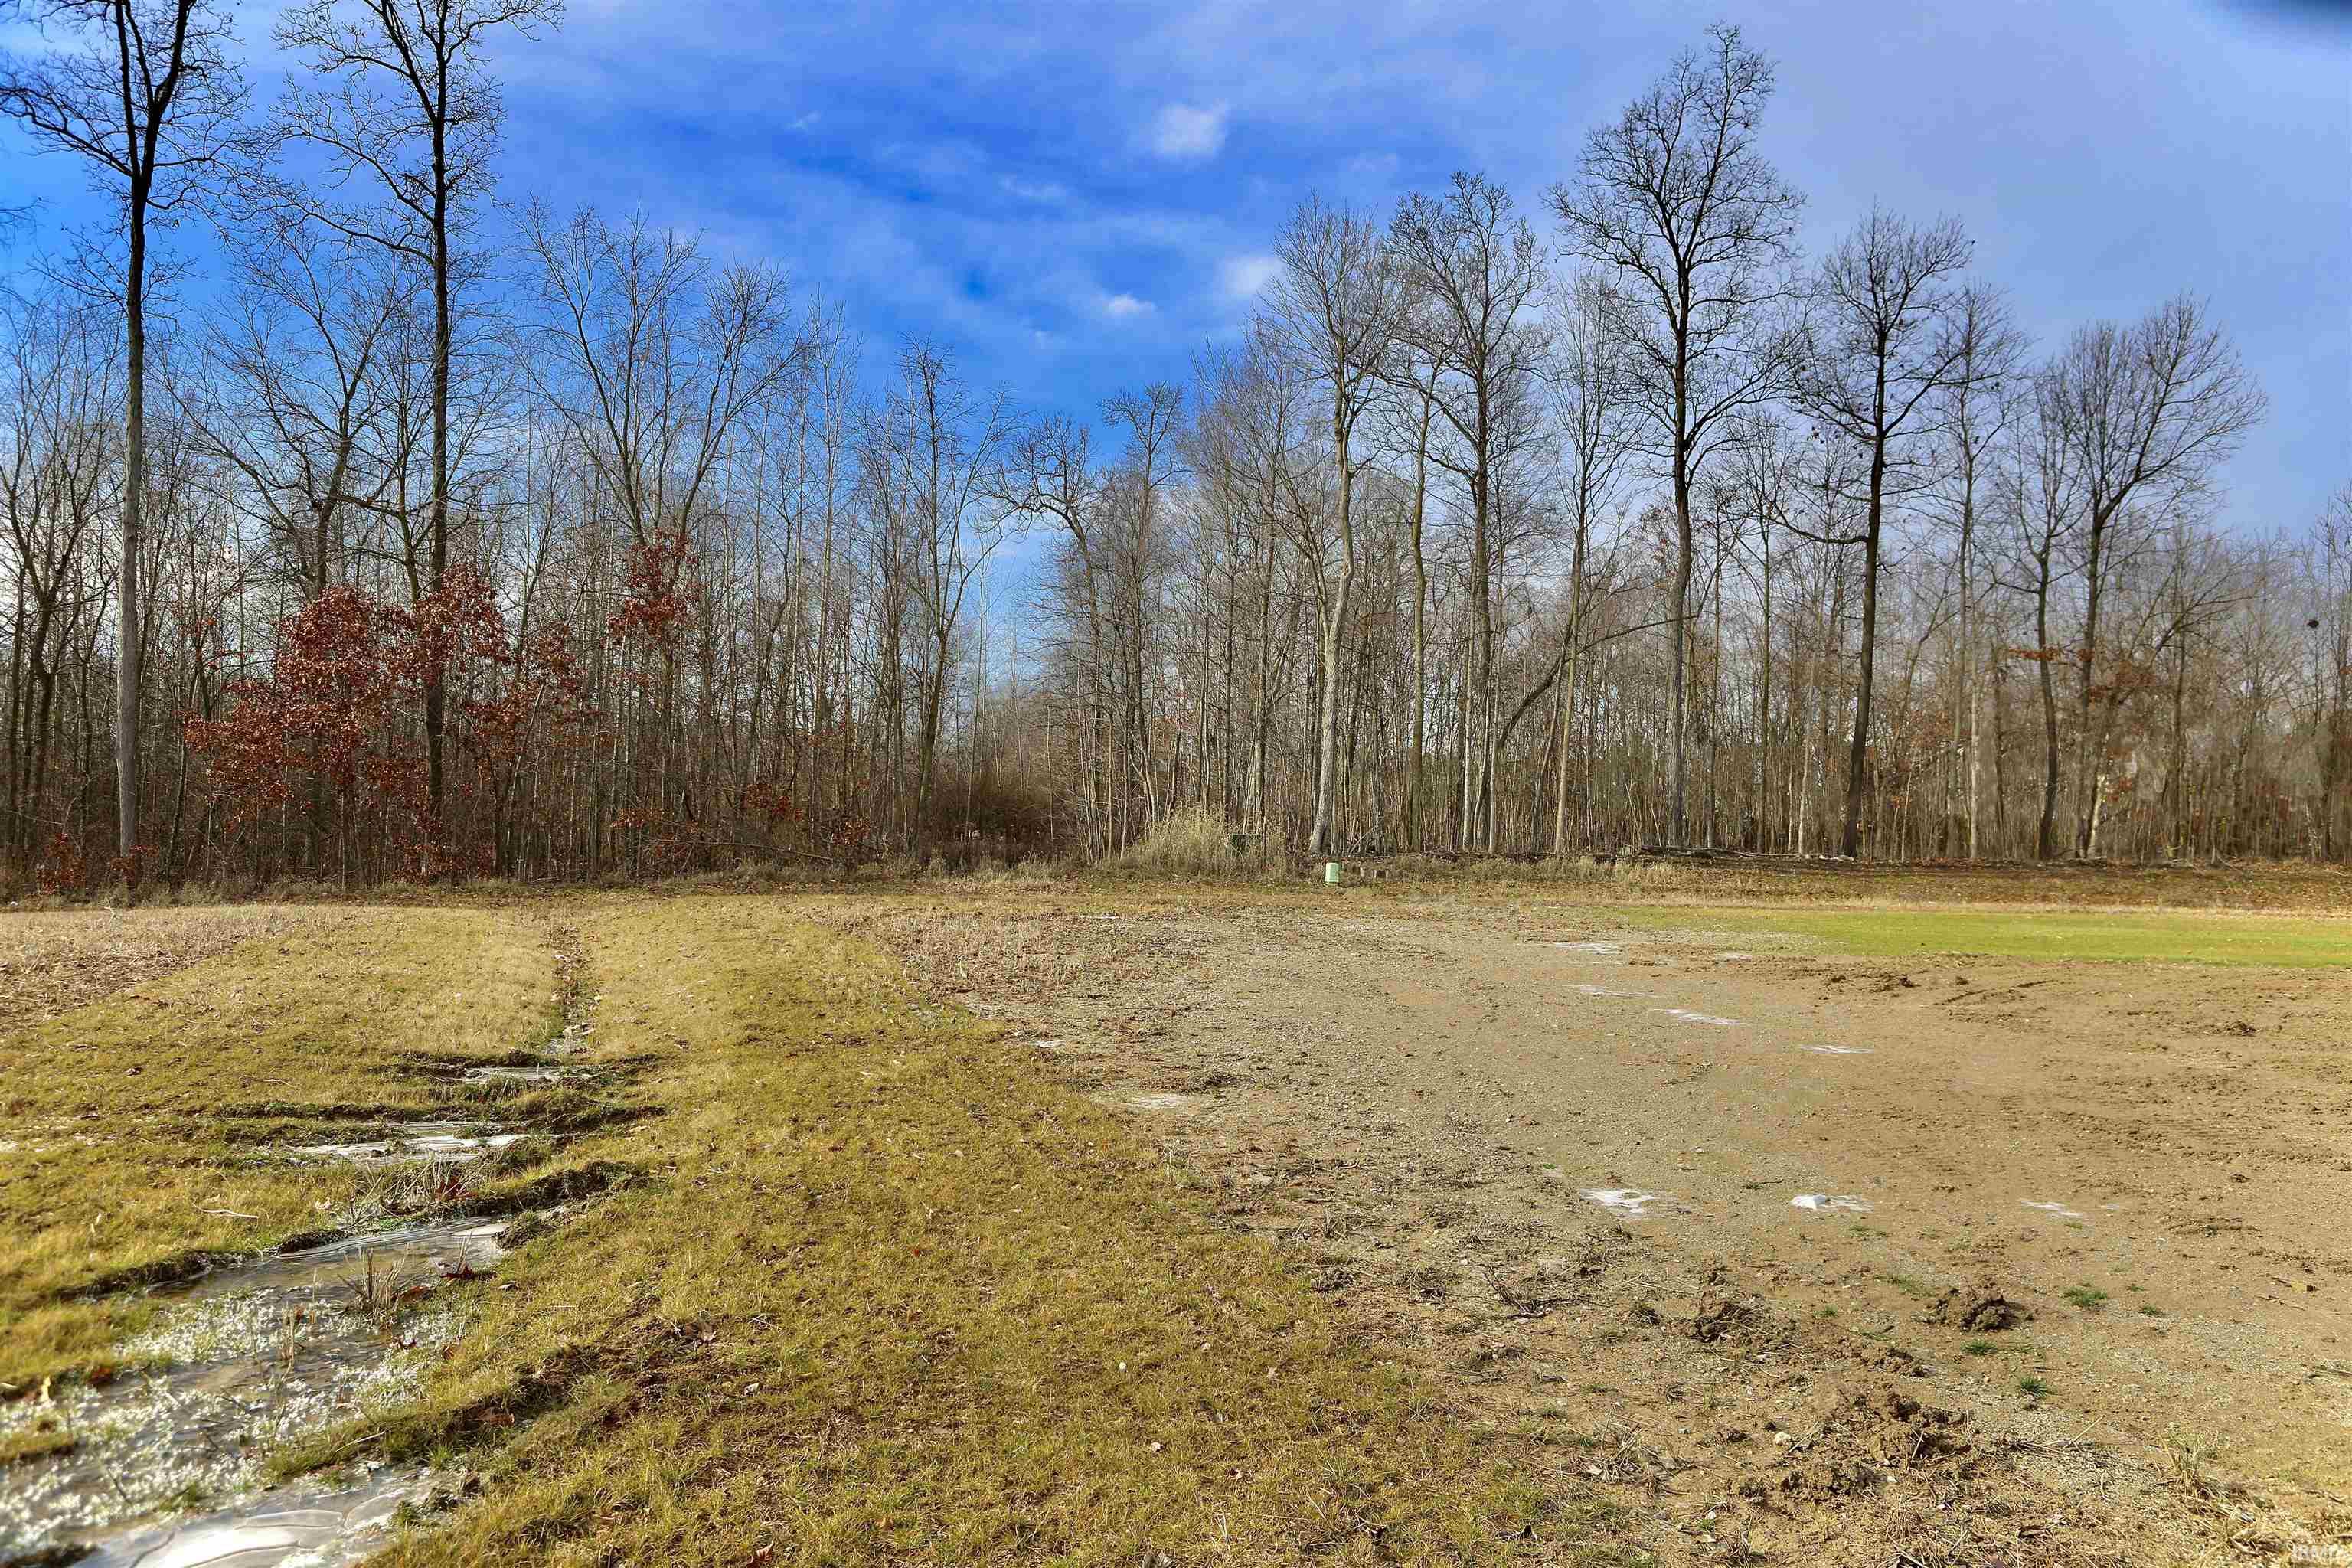 This image illustrates the view from the cul-de-sac's end, depicting the spacious section of the lot where a home can be constructed. The presence of a tree line adds a sense of privacy to property.